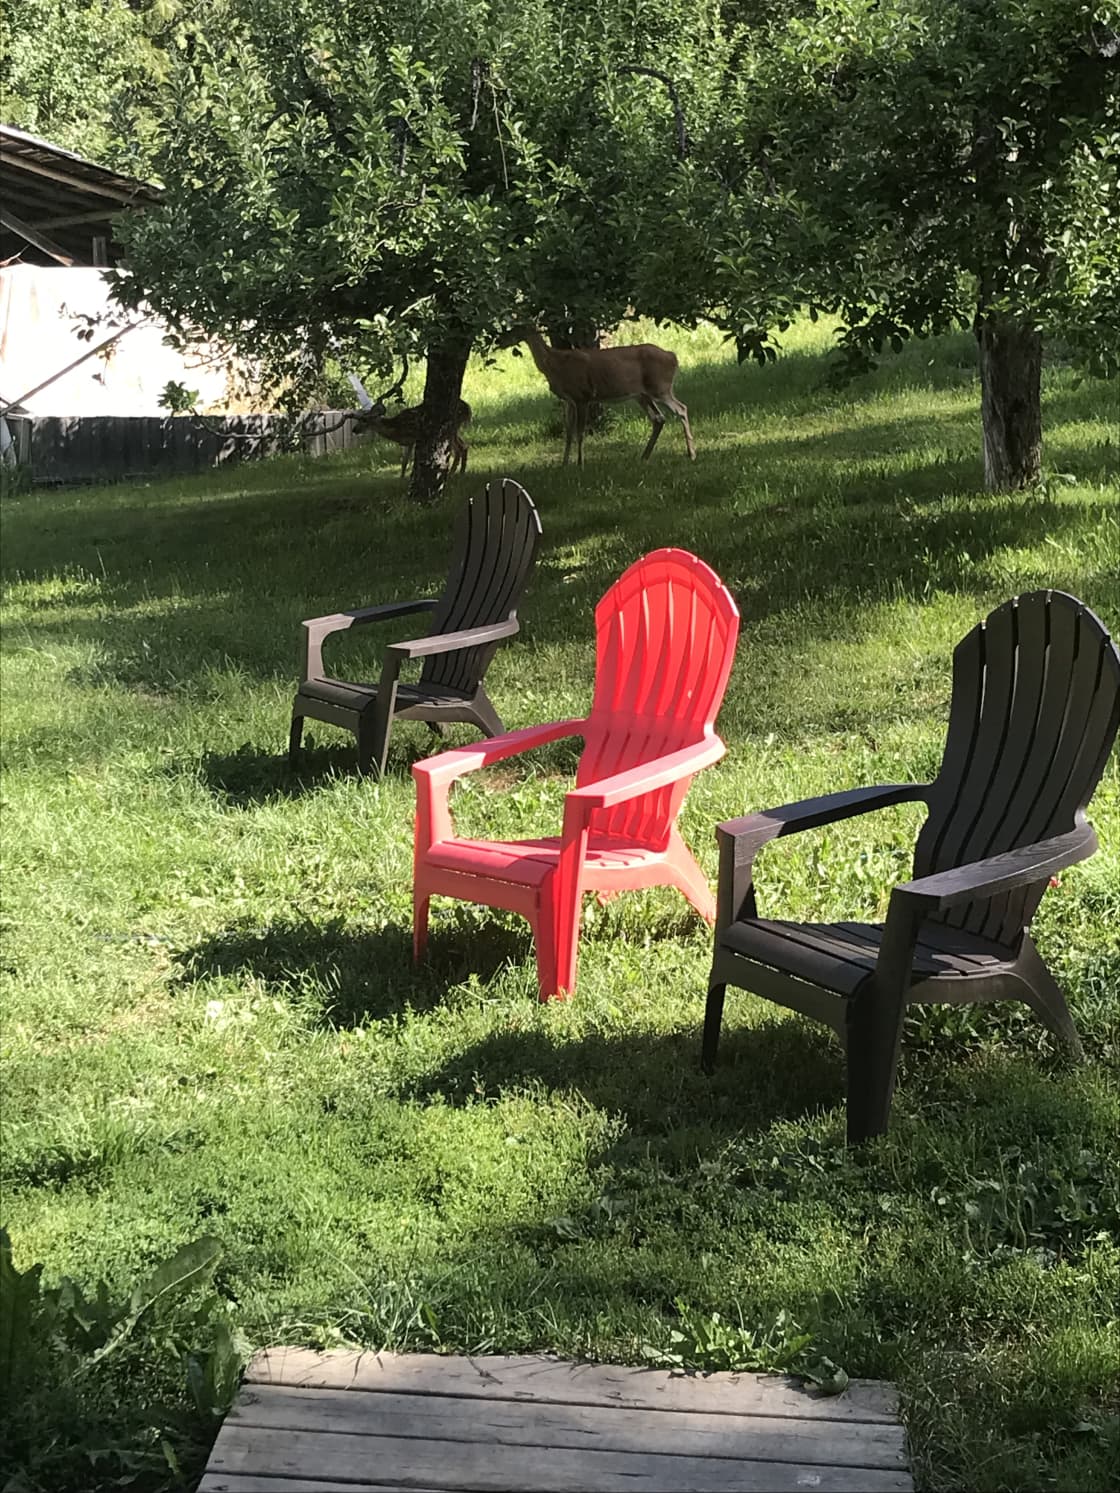 We share our space with many deer. 